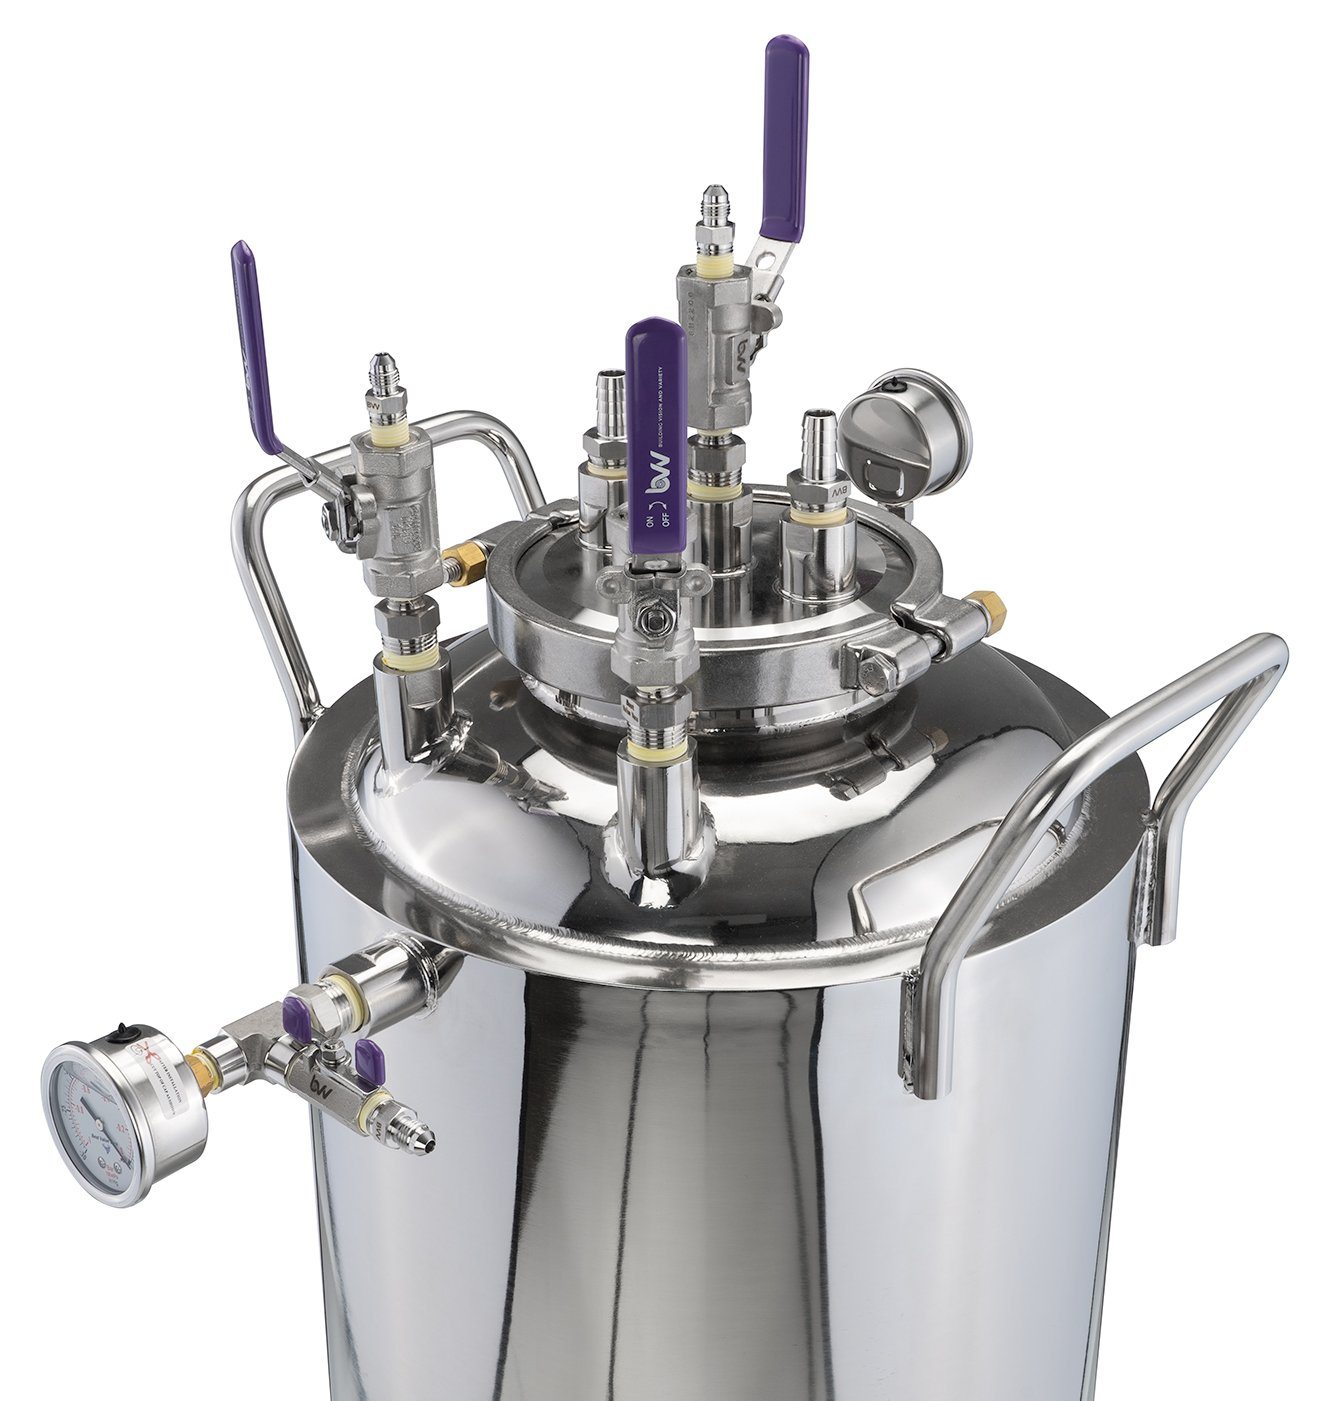 Top of Jacketed Stainless Steel LP Tank with Internal Condensing Coil and Dip Tube 100 Gallon